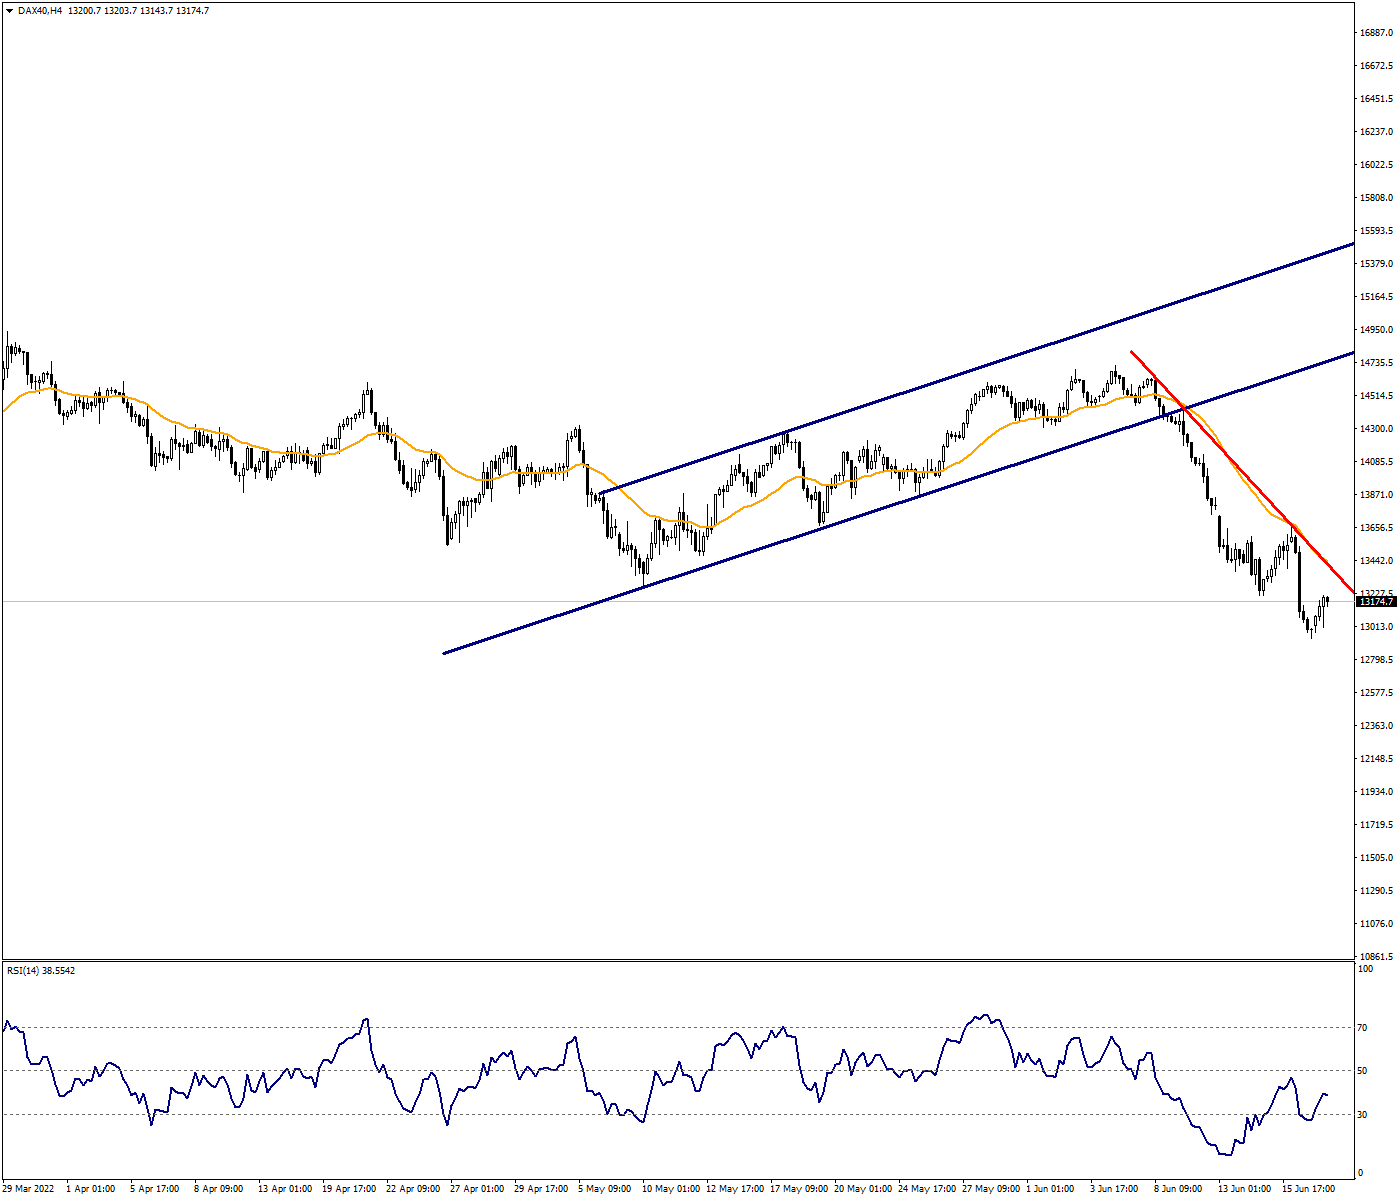 DAX40:The Pressure May Continue in Index